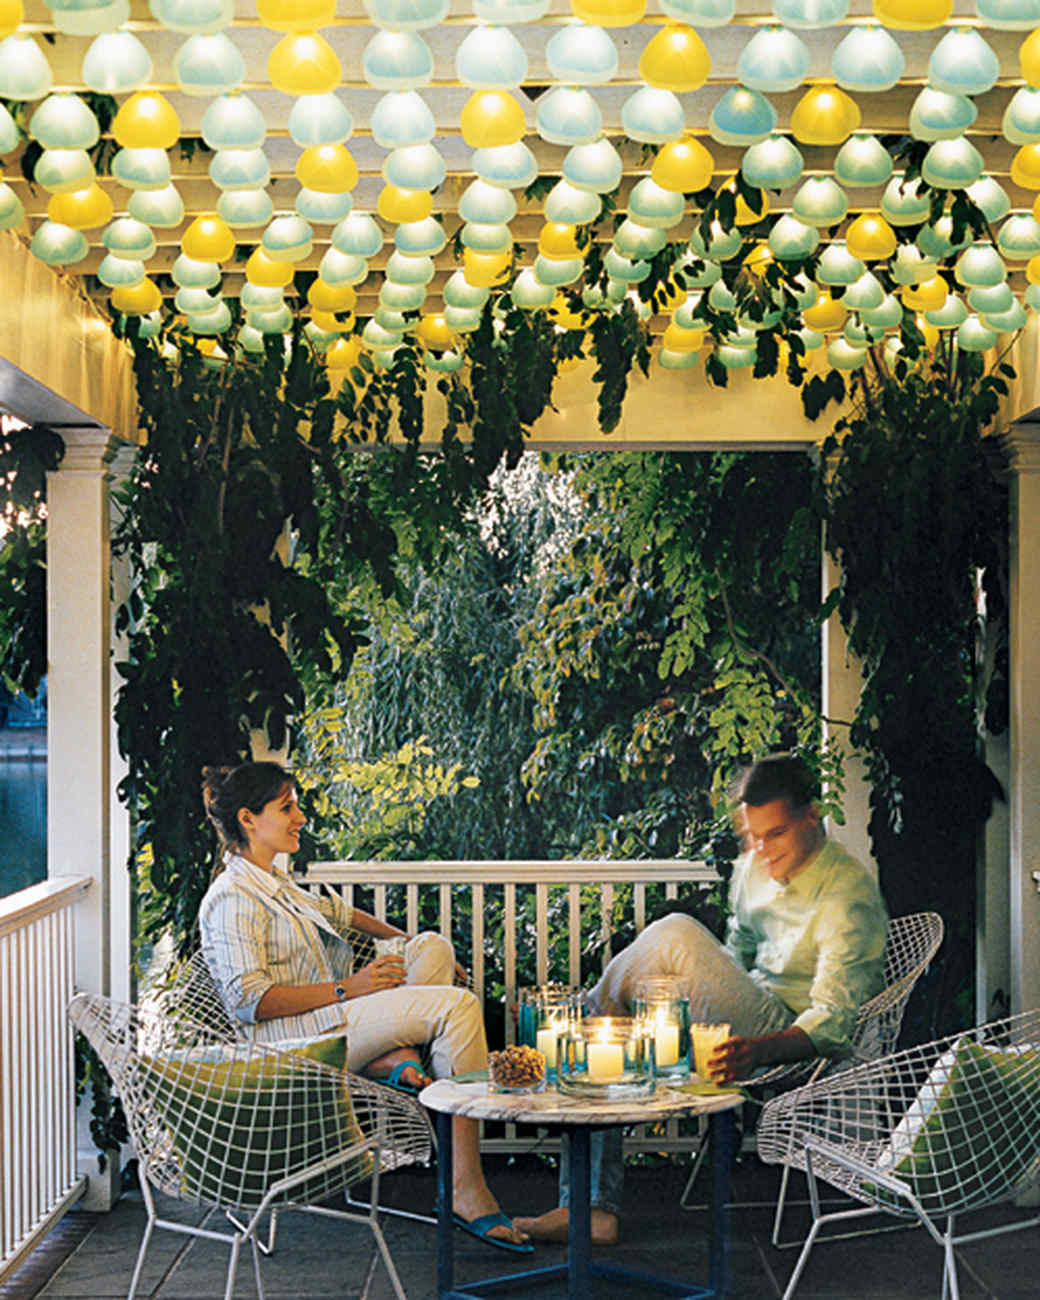 Backyard Party Decoration Ideas
 Outdoor Party Decorations